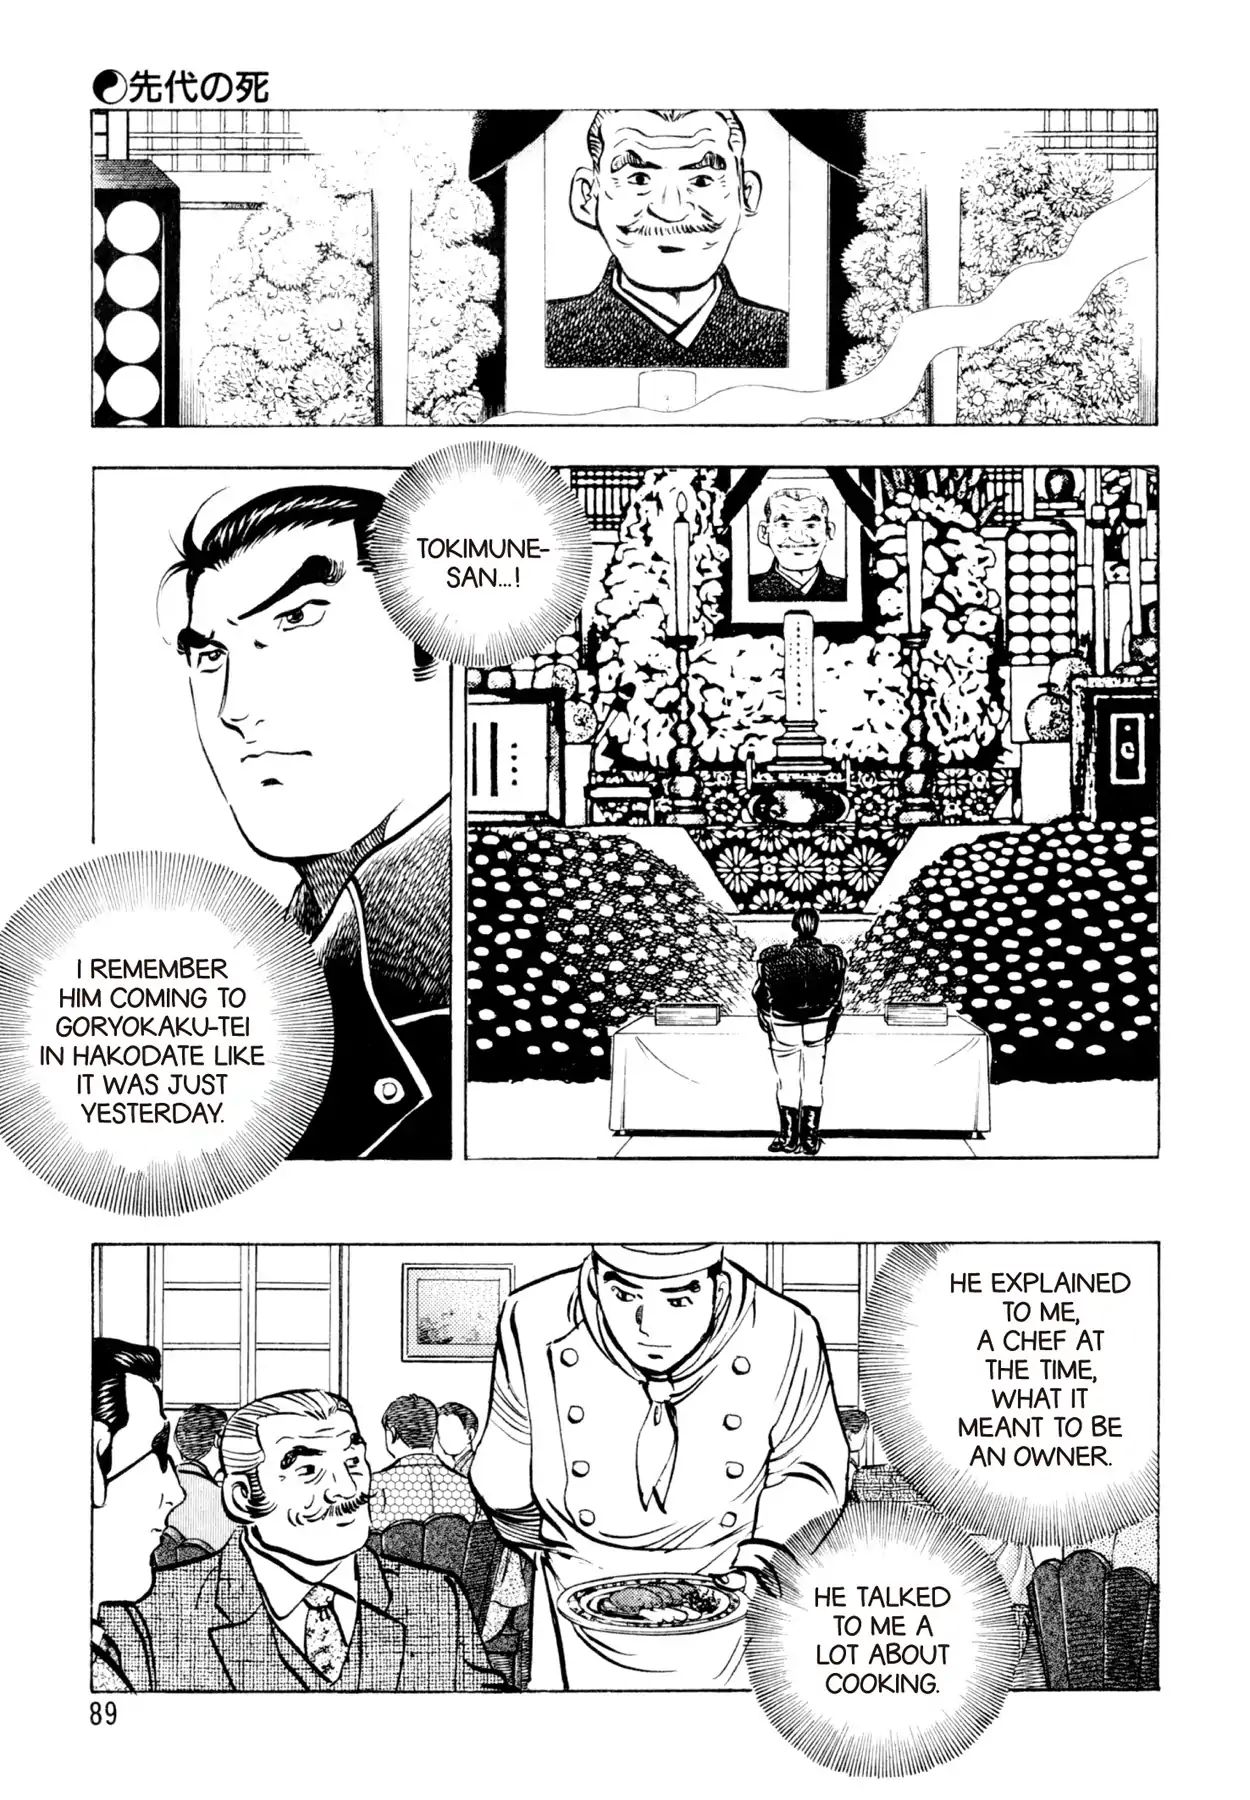 Shoku King VOL.12 CHAPTER 101: DEATH OF A GENERATION